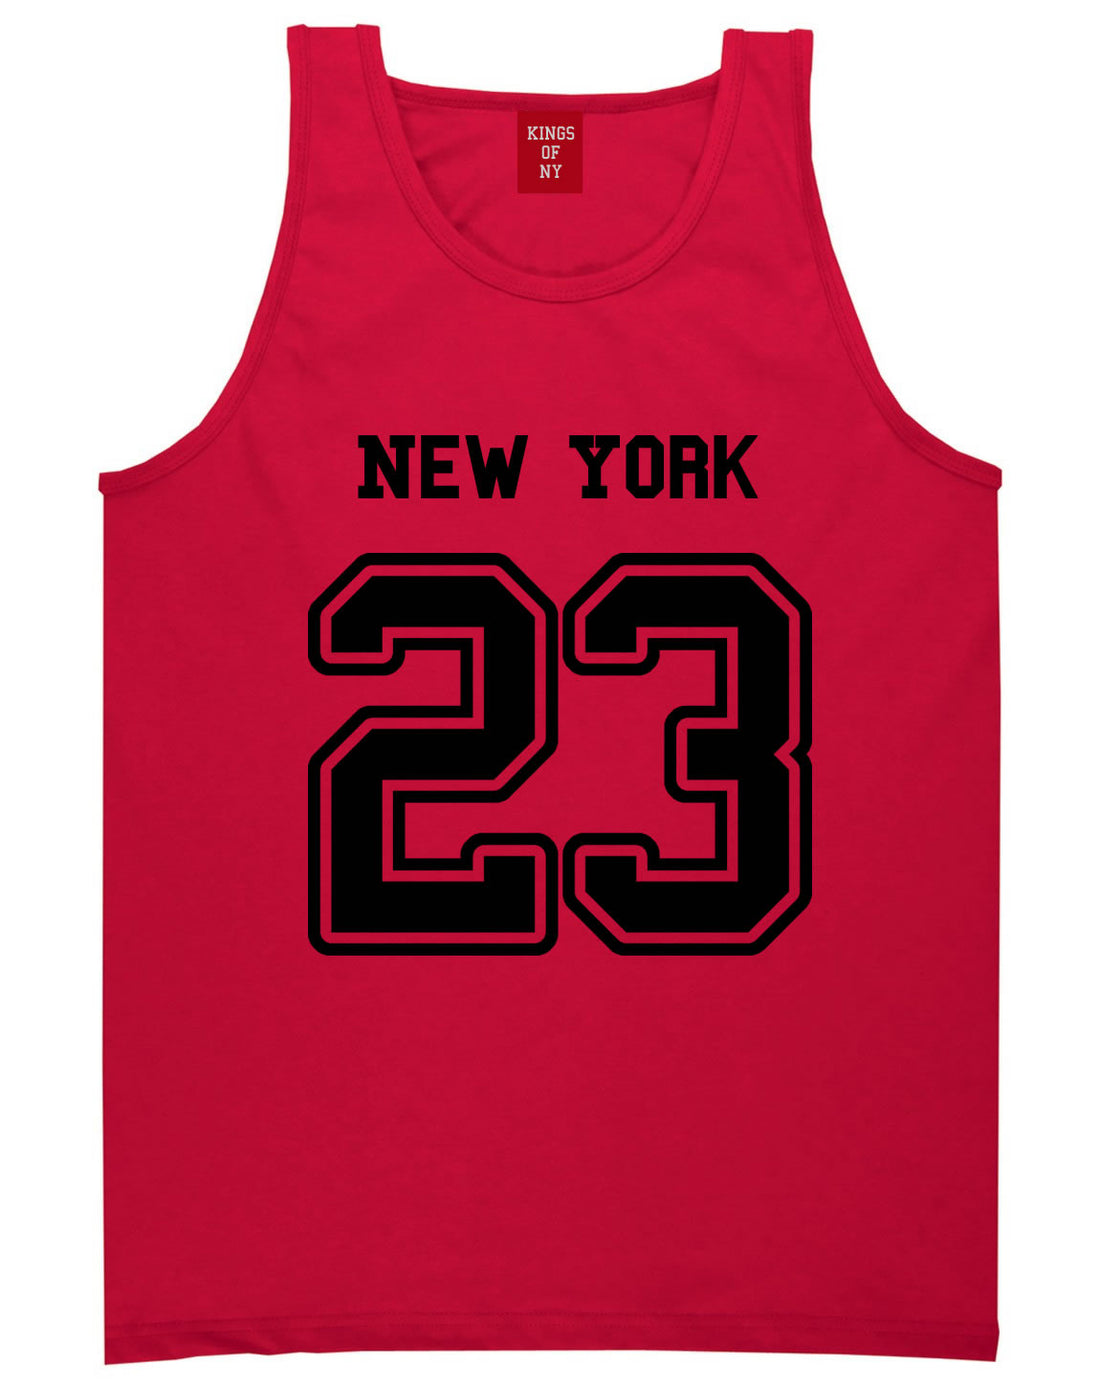 Sport Style New York 23 Team State Jersey Mens Tank Top By Kings Of NY